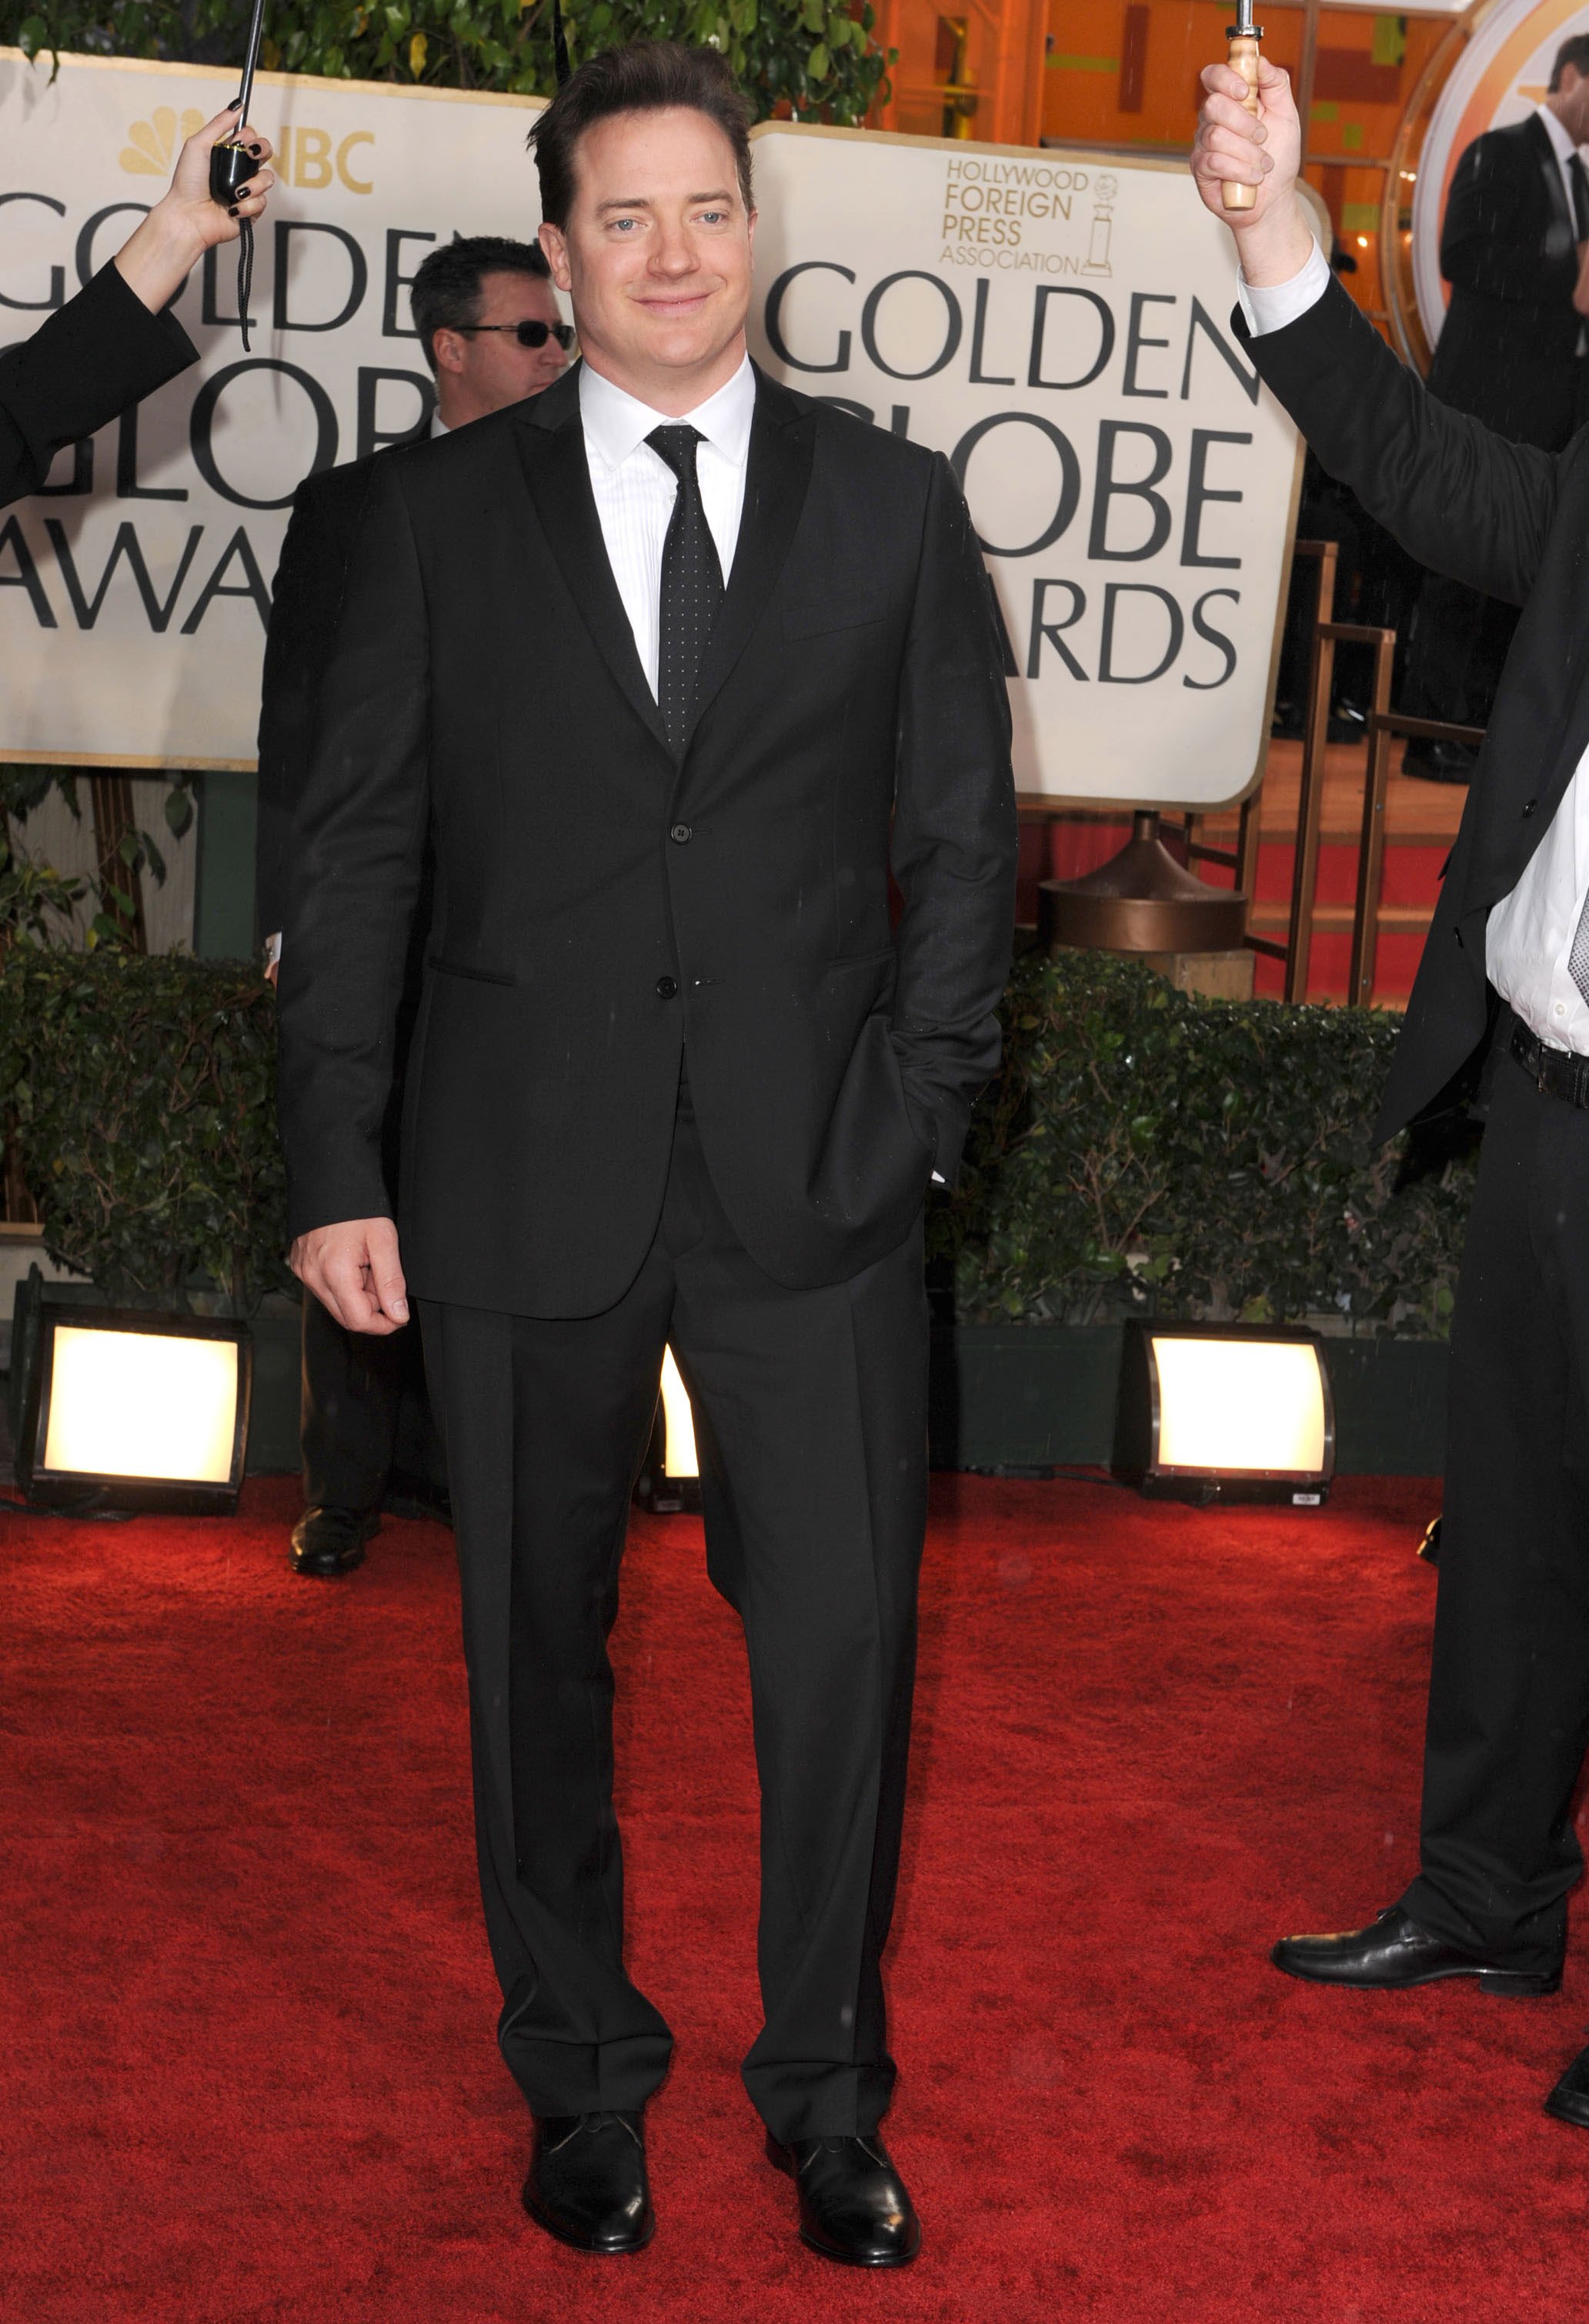 Brendan Fraser attends the 67th Annual Golden Globes Awards at The Beverly Hilton Hotel on January 17, 2010 in Beverly Hills, California | Source: Getty Images 